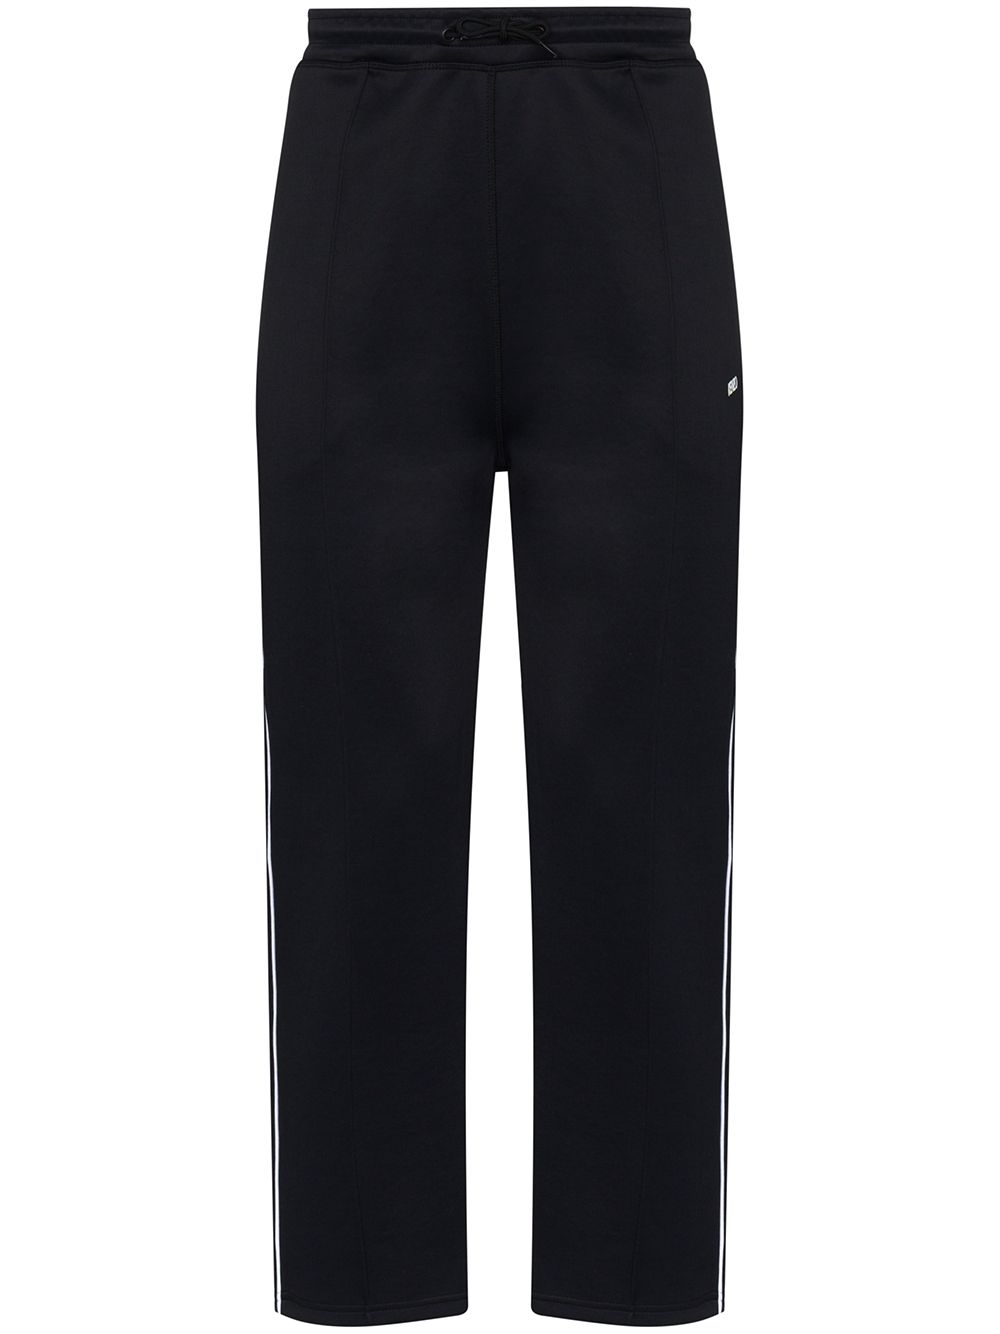 KENZO CONTRAST LOGO TRACK trousers